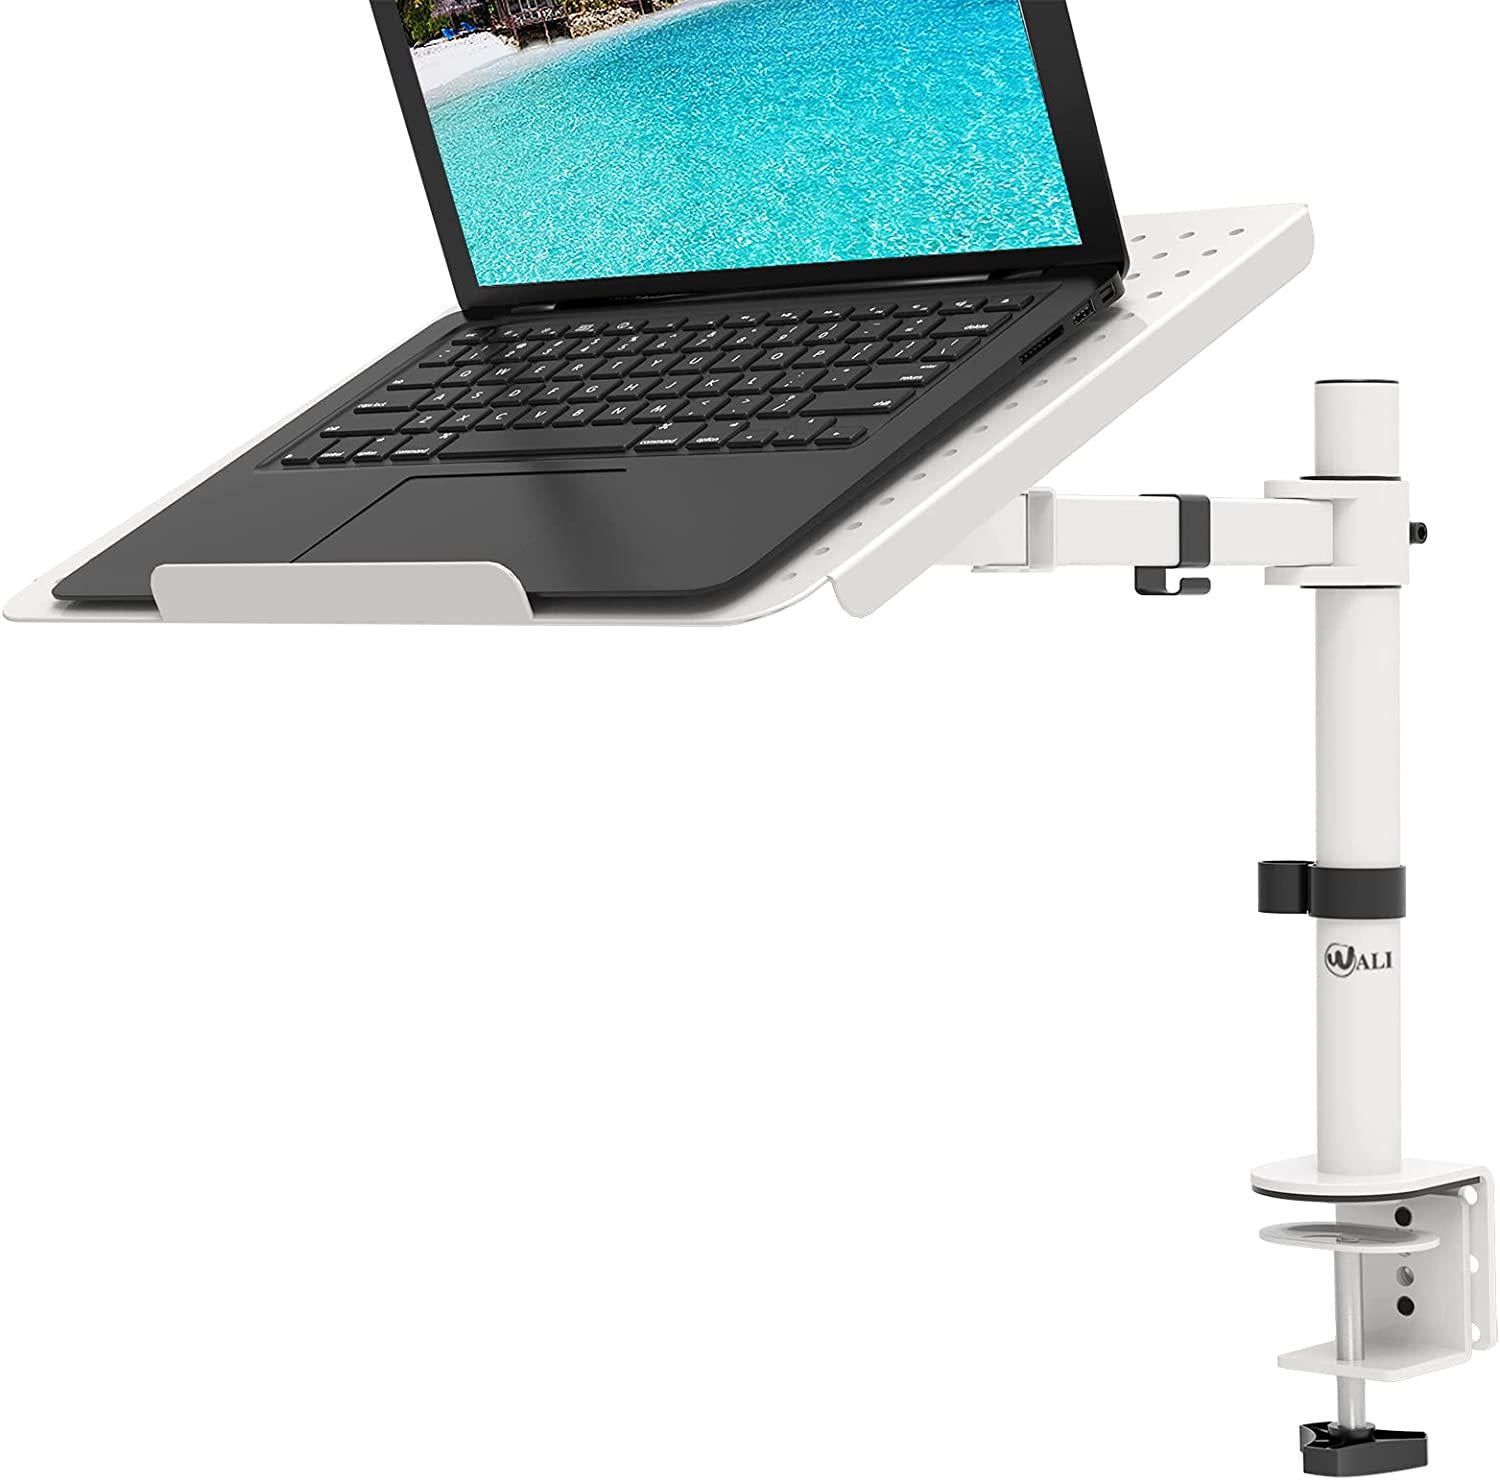 WALI, Laptop Mount Arm for Desk, VESA Laptop Tray, Fully Adjustable, up to 17 inch, 22lbs, with Vented Cooling Platform Stand (M00LP-W), White by WALI